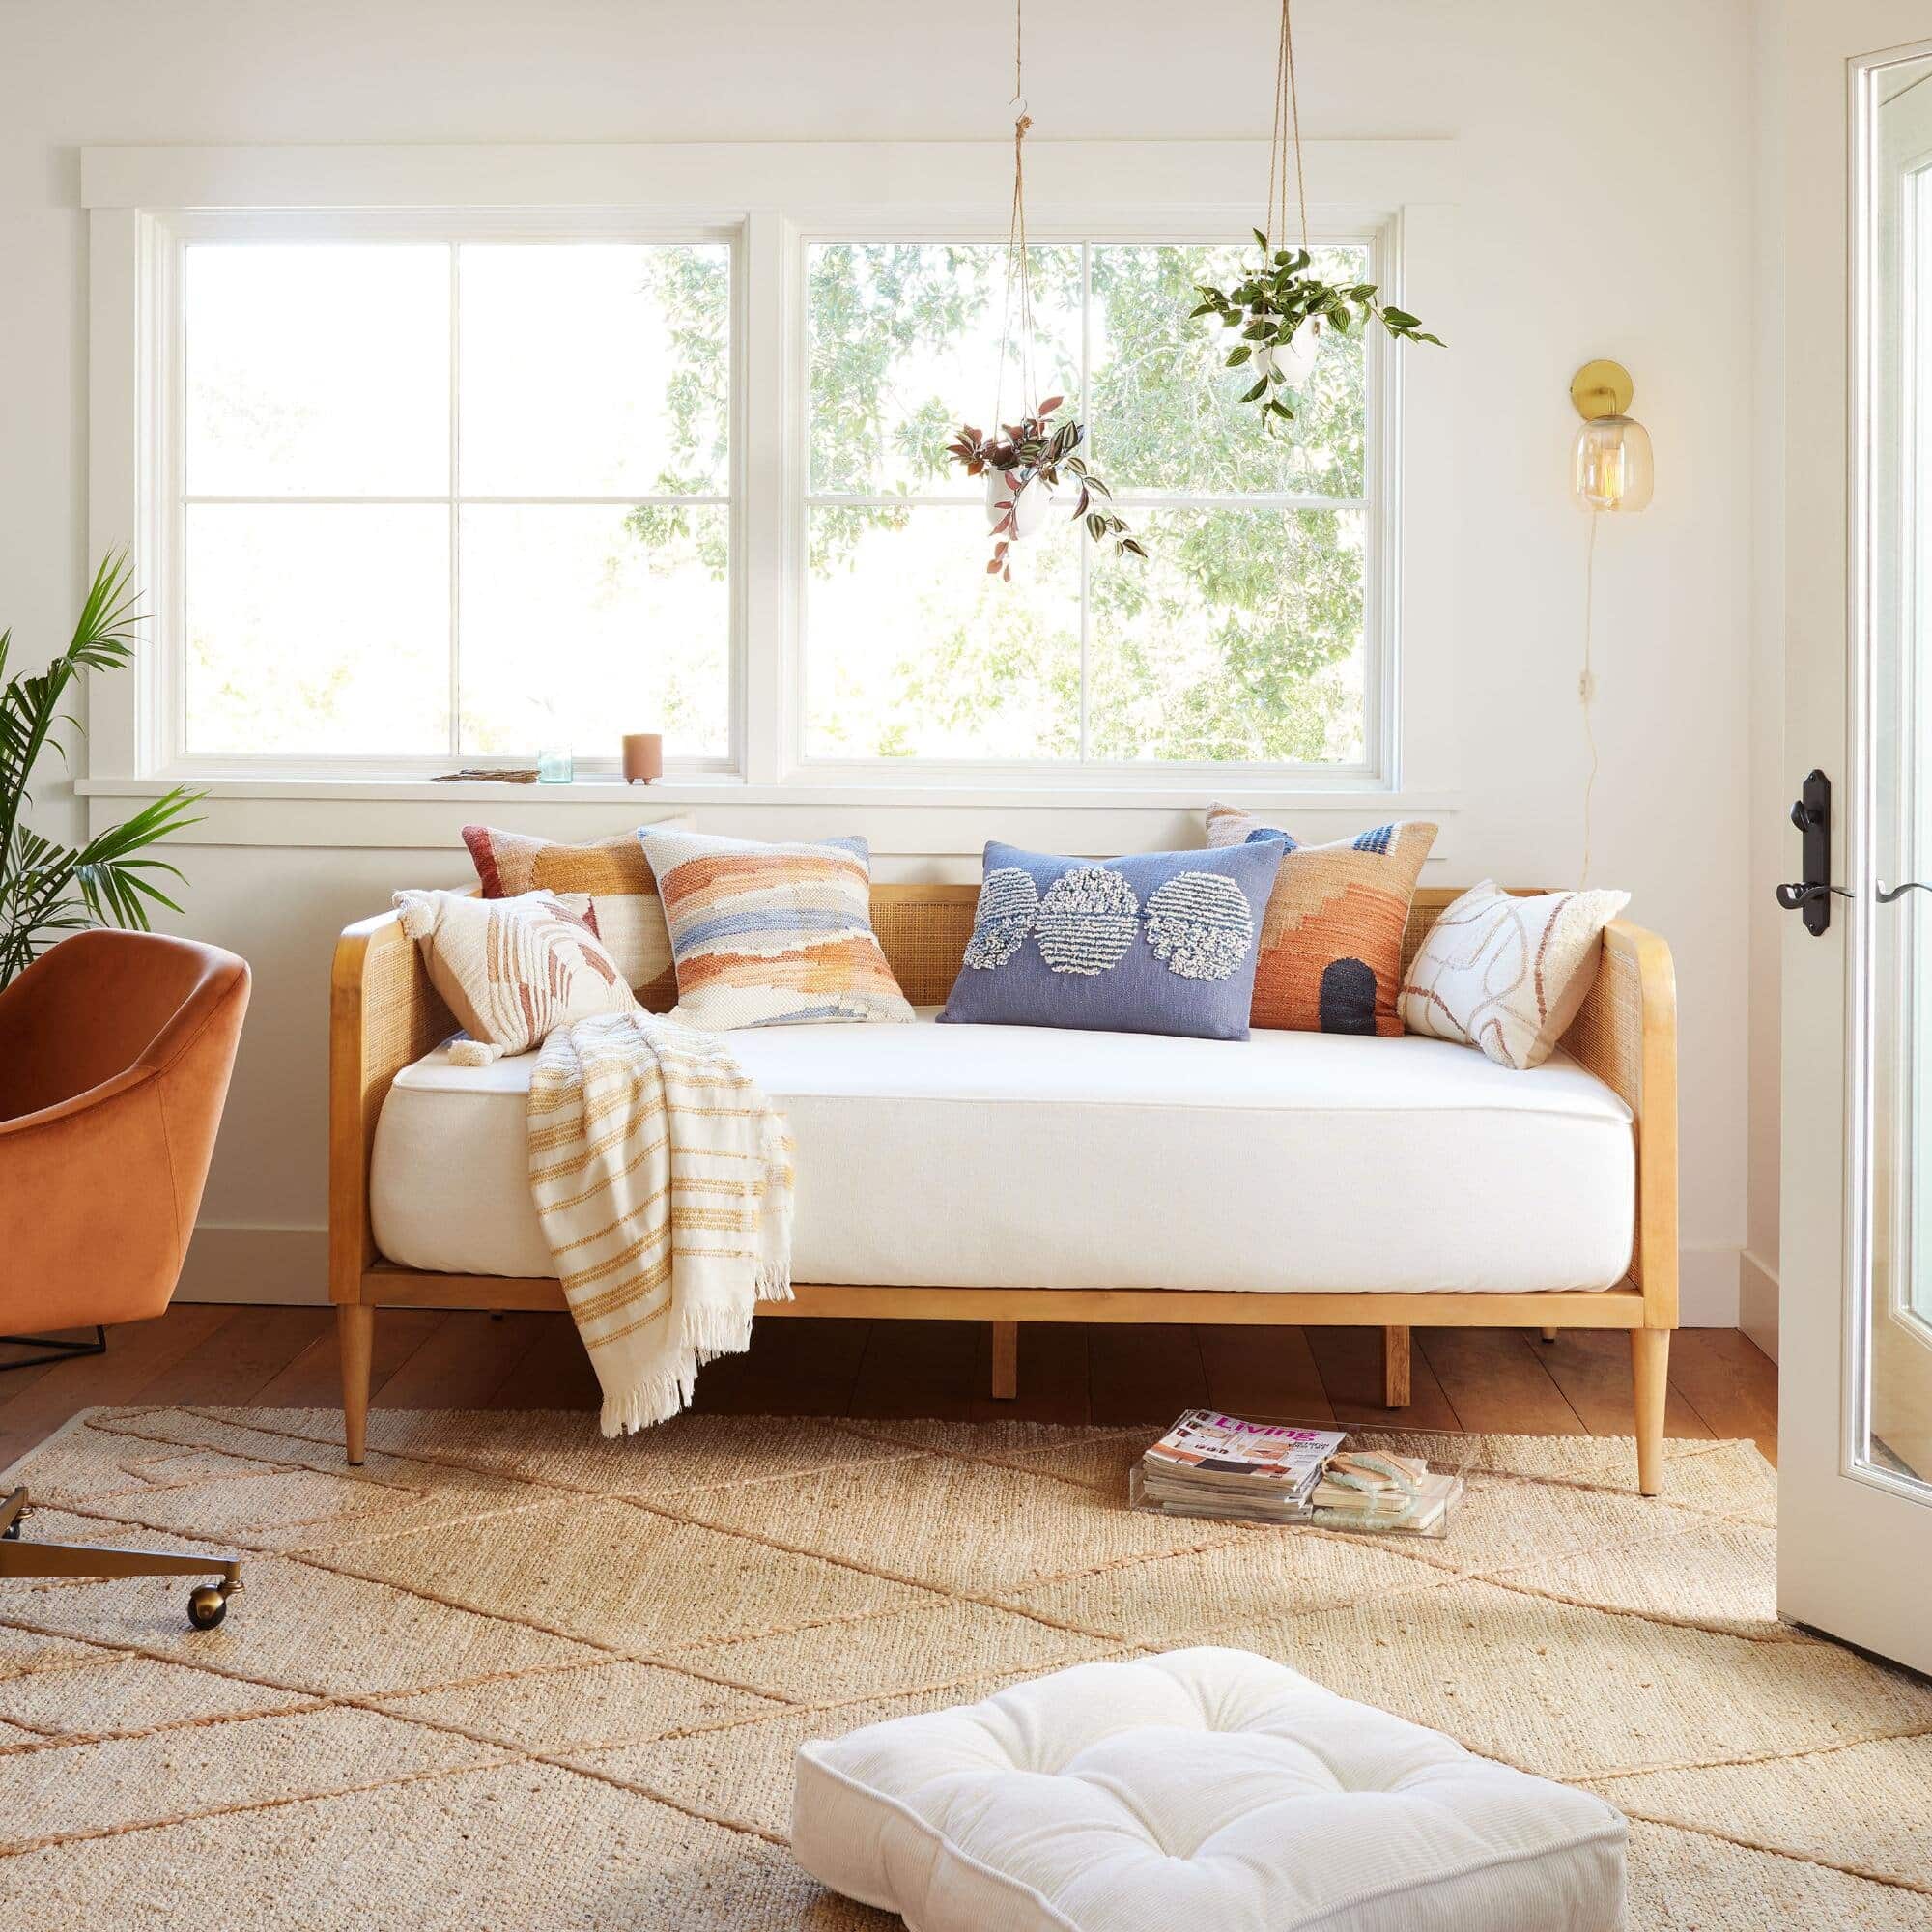 Daybed in clean and neutral study room featured in summer decor ideas